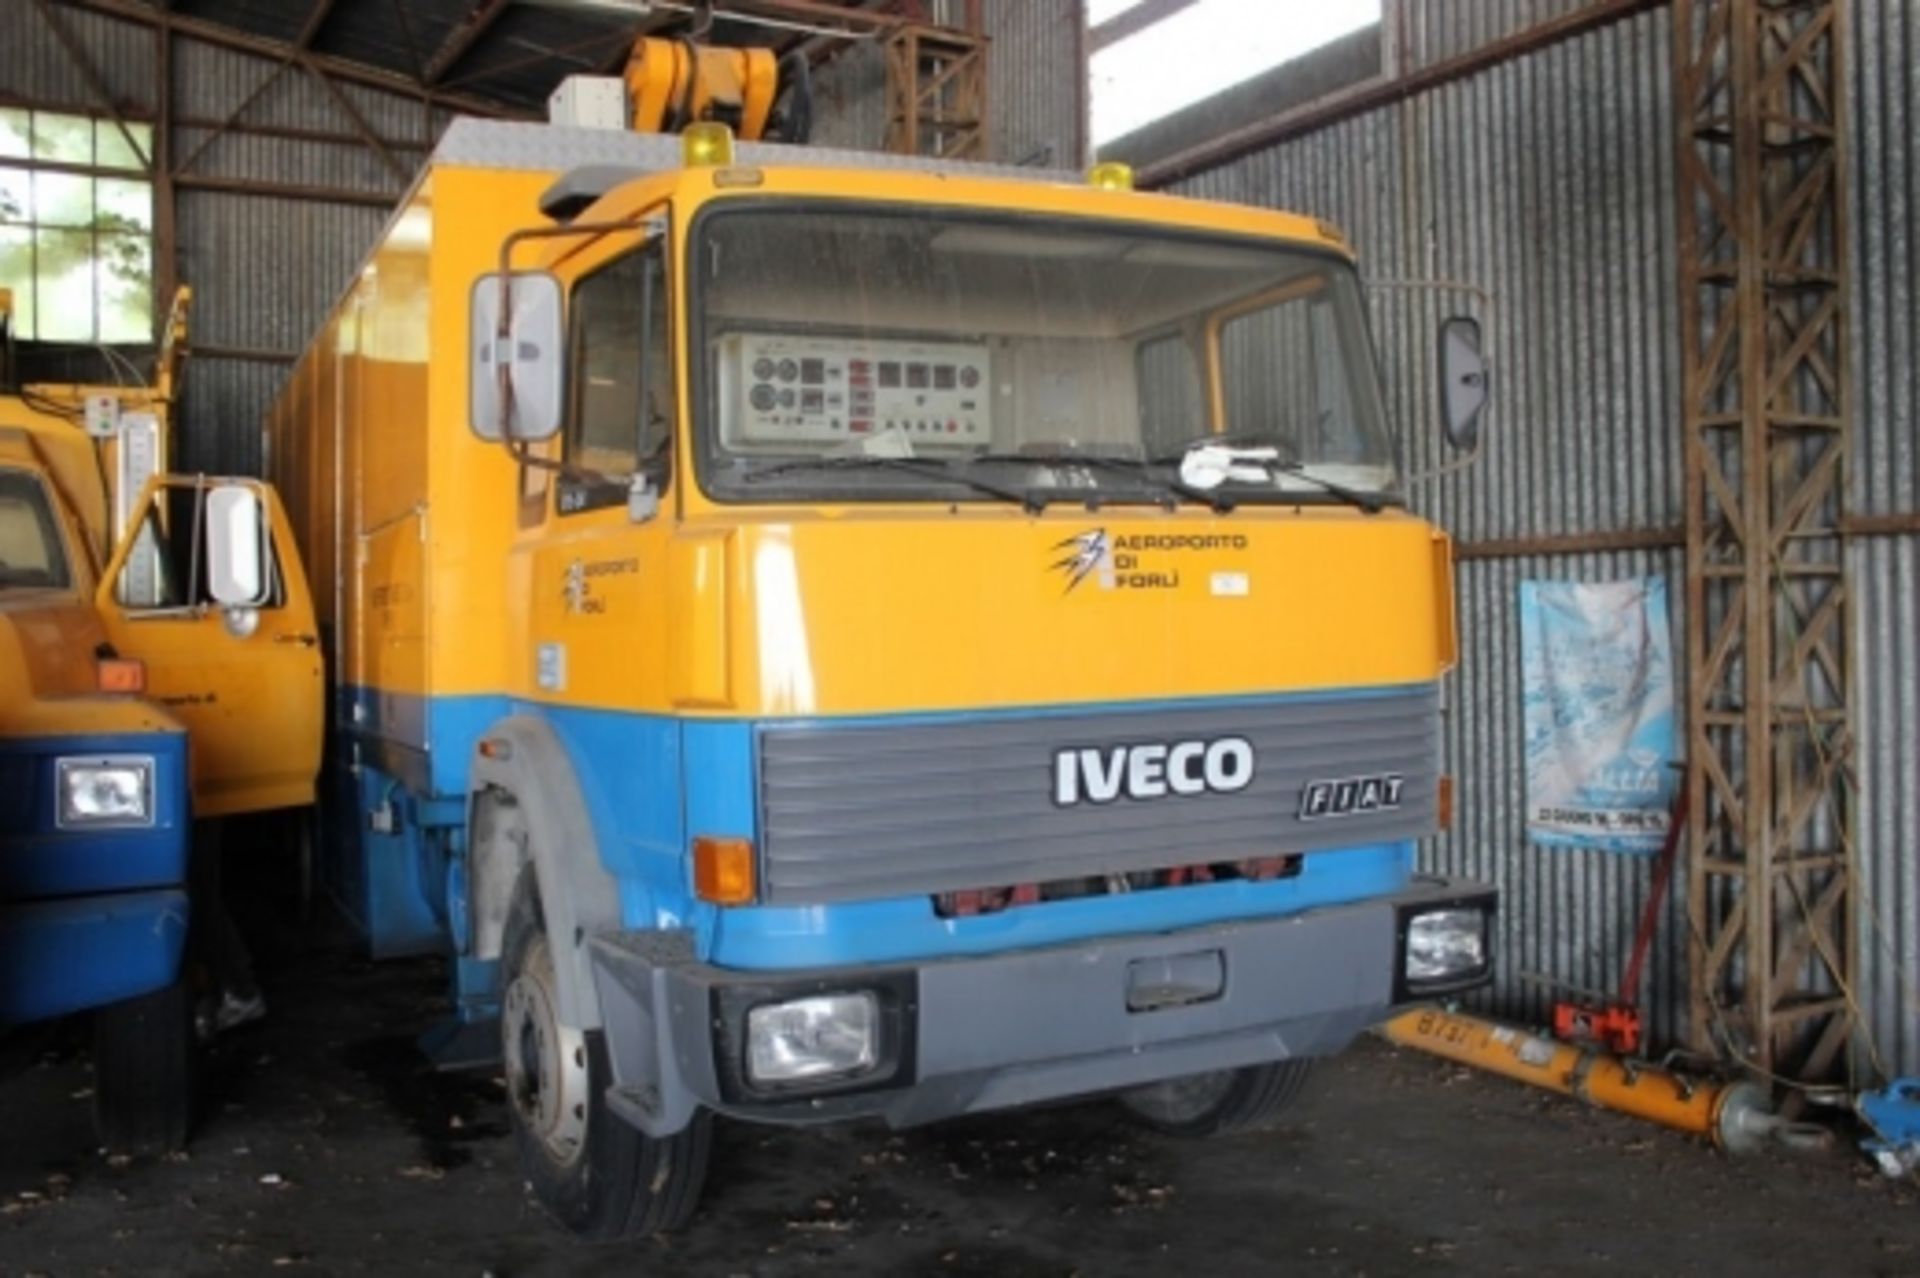 1,Cristianini Truck for de-icing, Iveco (purchase year 2005) Click here for more details